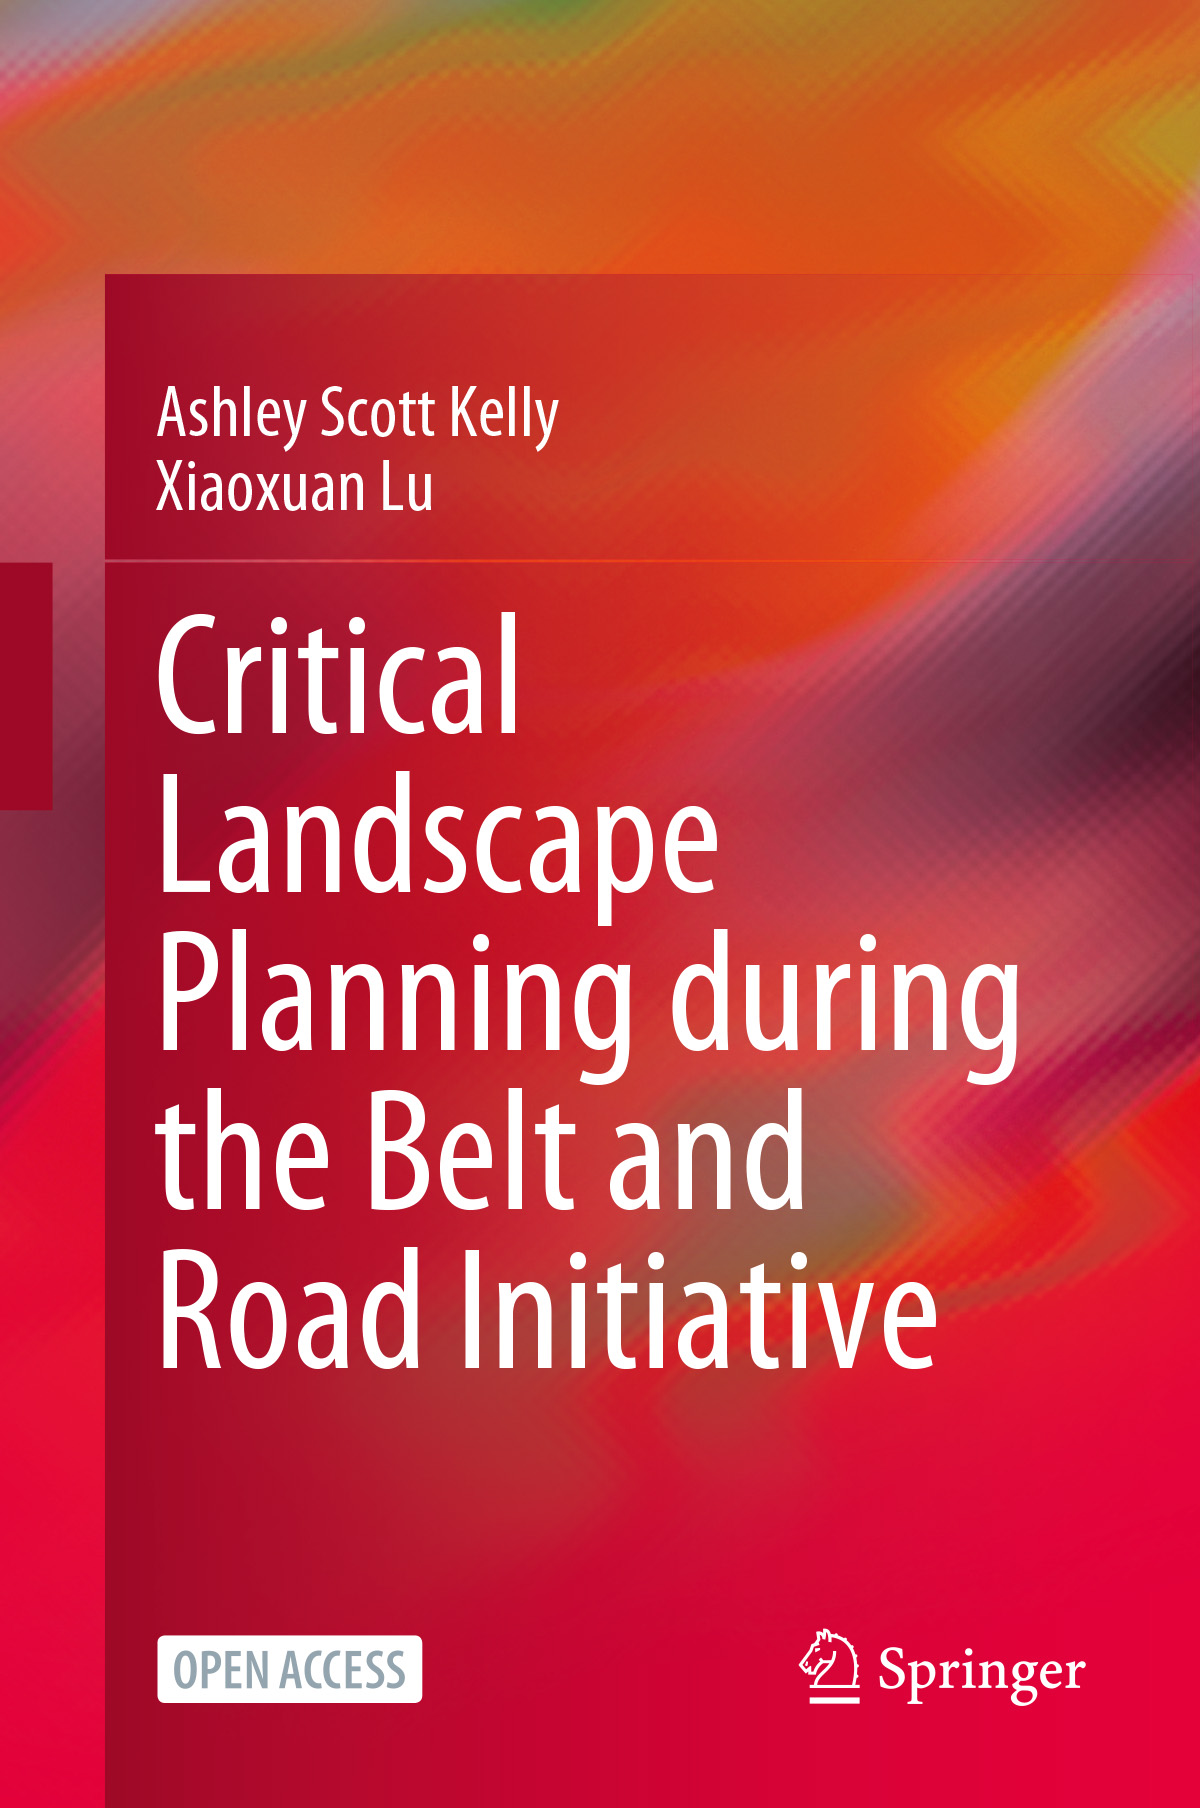 Critical Landscape Planning during the Belt and Road Initiative (2021). By Ashley Scott Kelly and Xiaoxuan Lu, 2021.